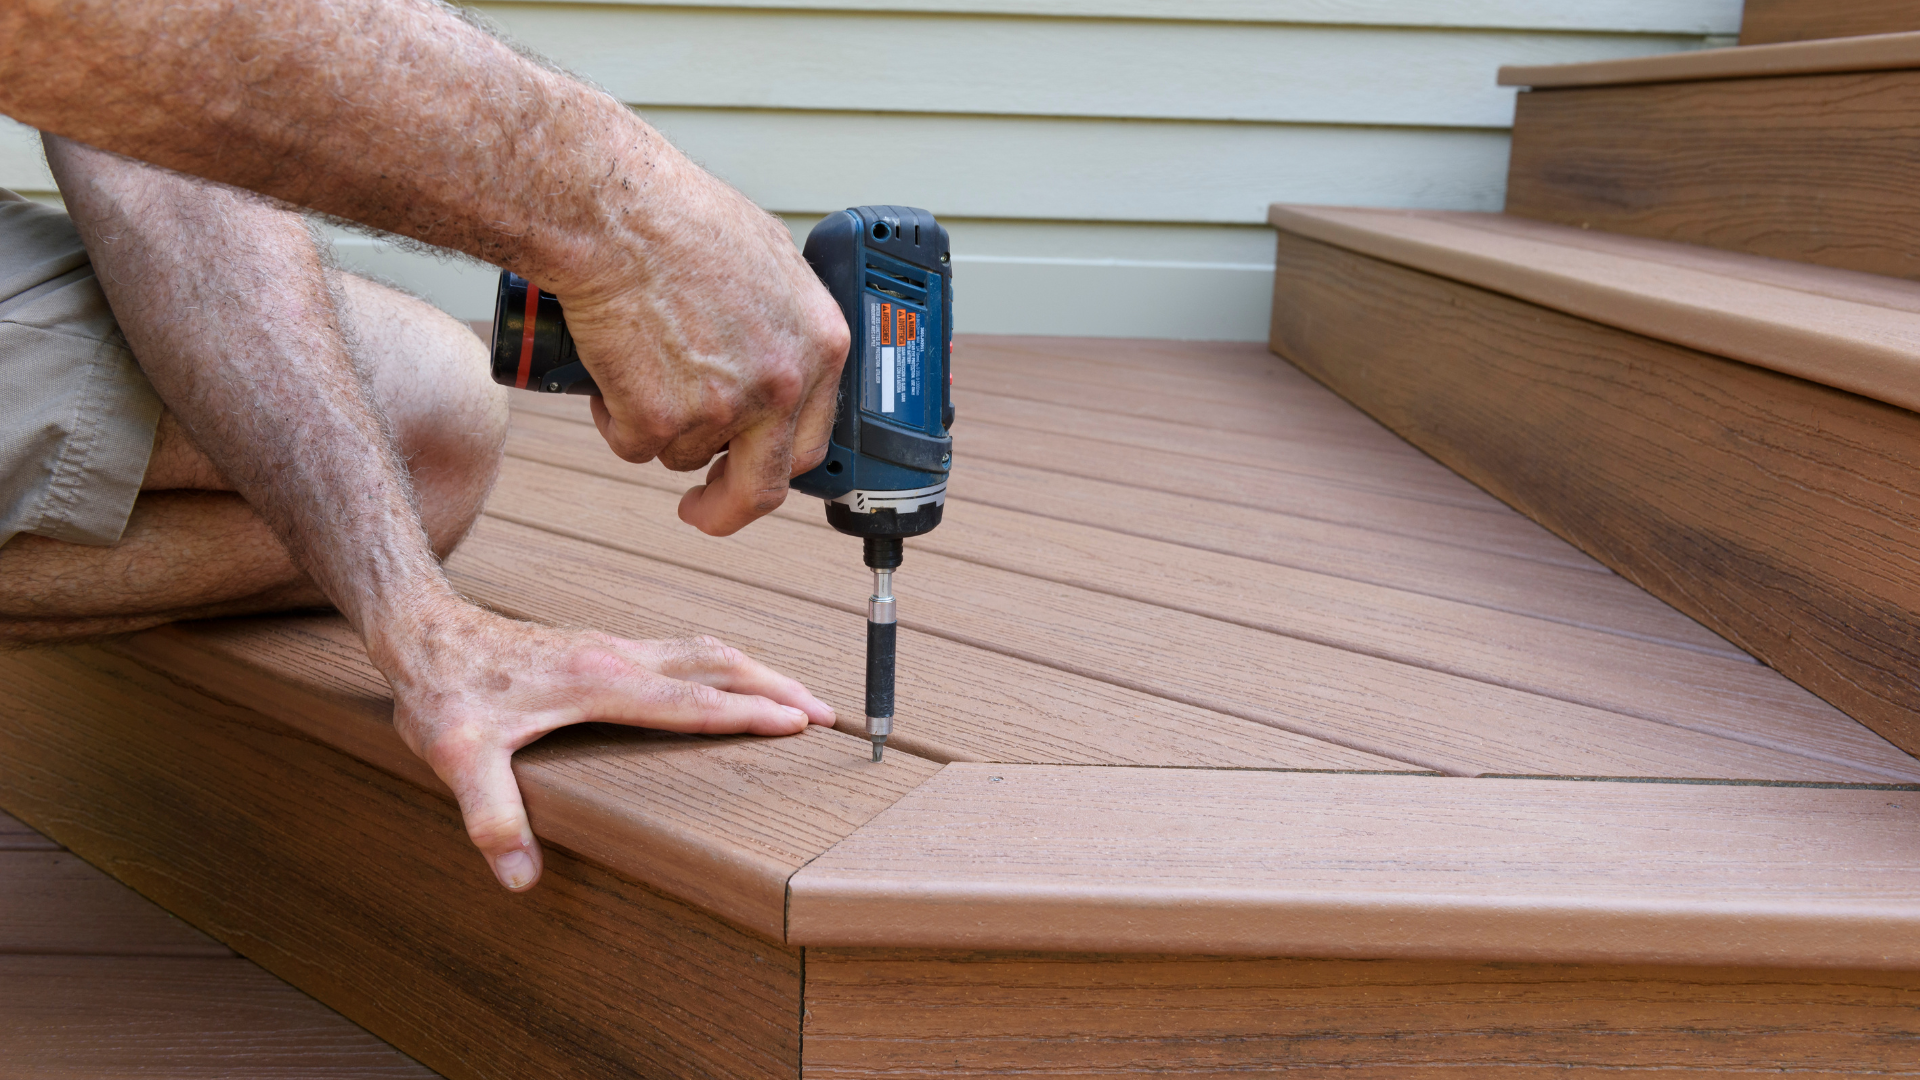 A craftsman drilling into wooden decking using an electric drill